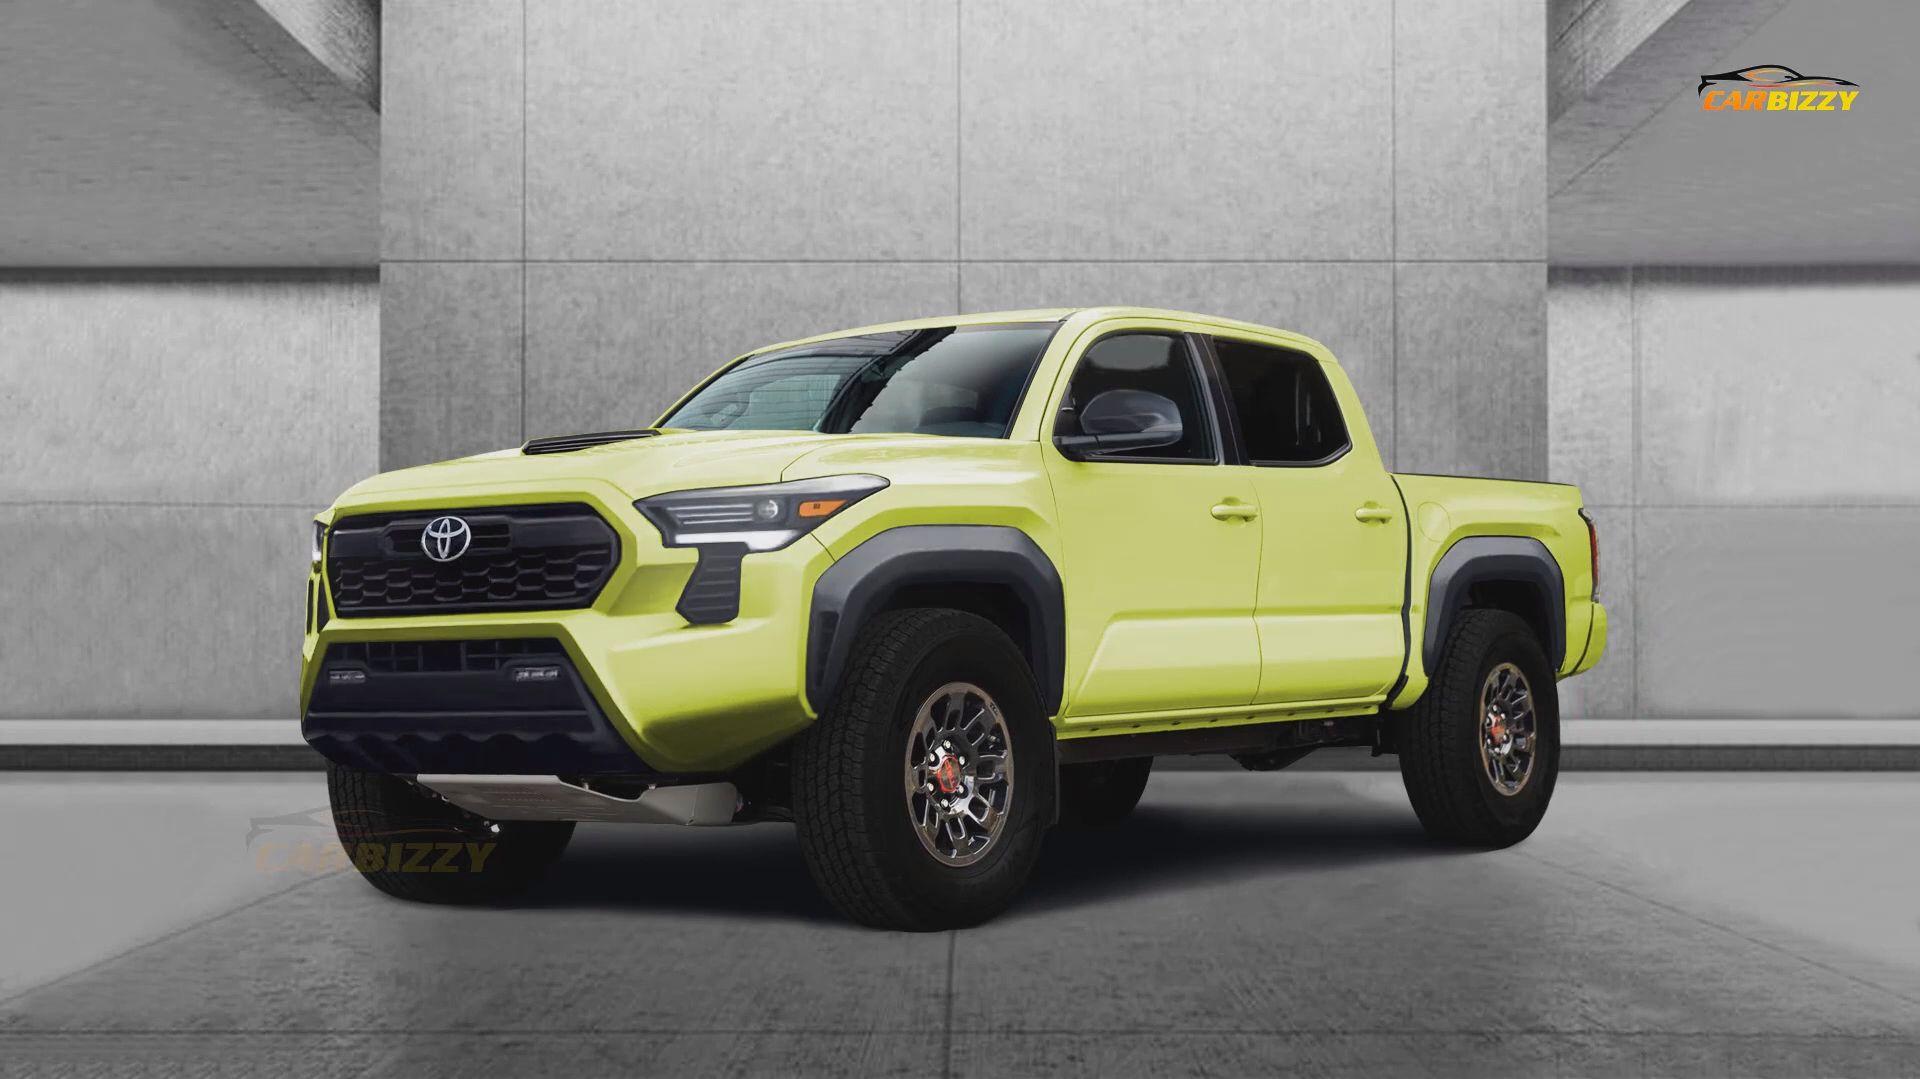 Toyota Taa Rendered In Colorful Way Next Gen Truck May Go